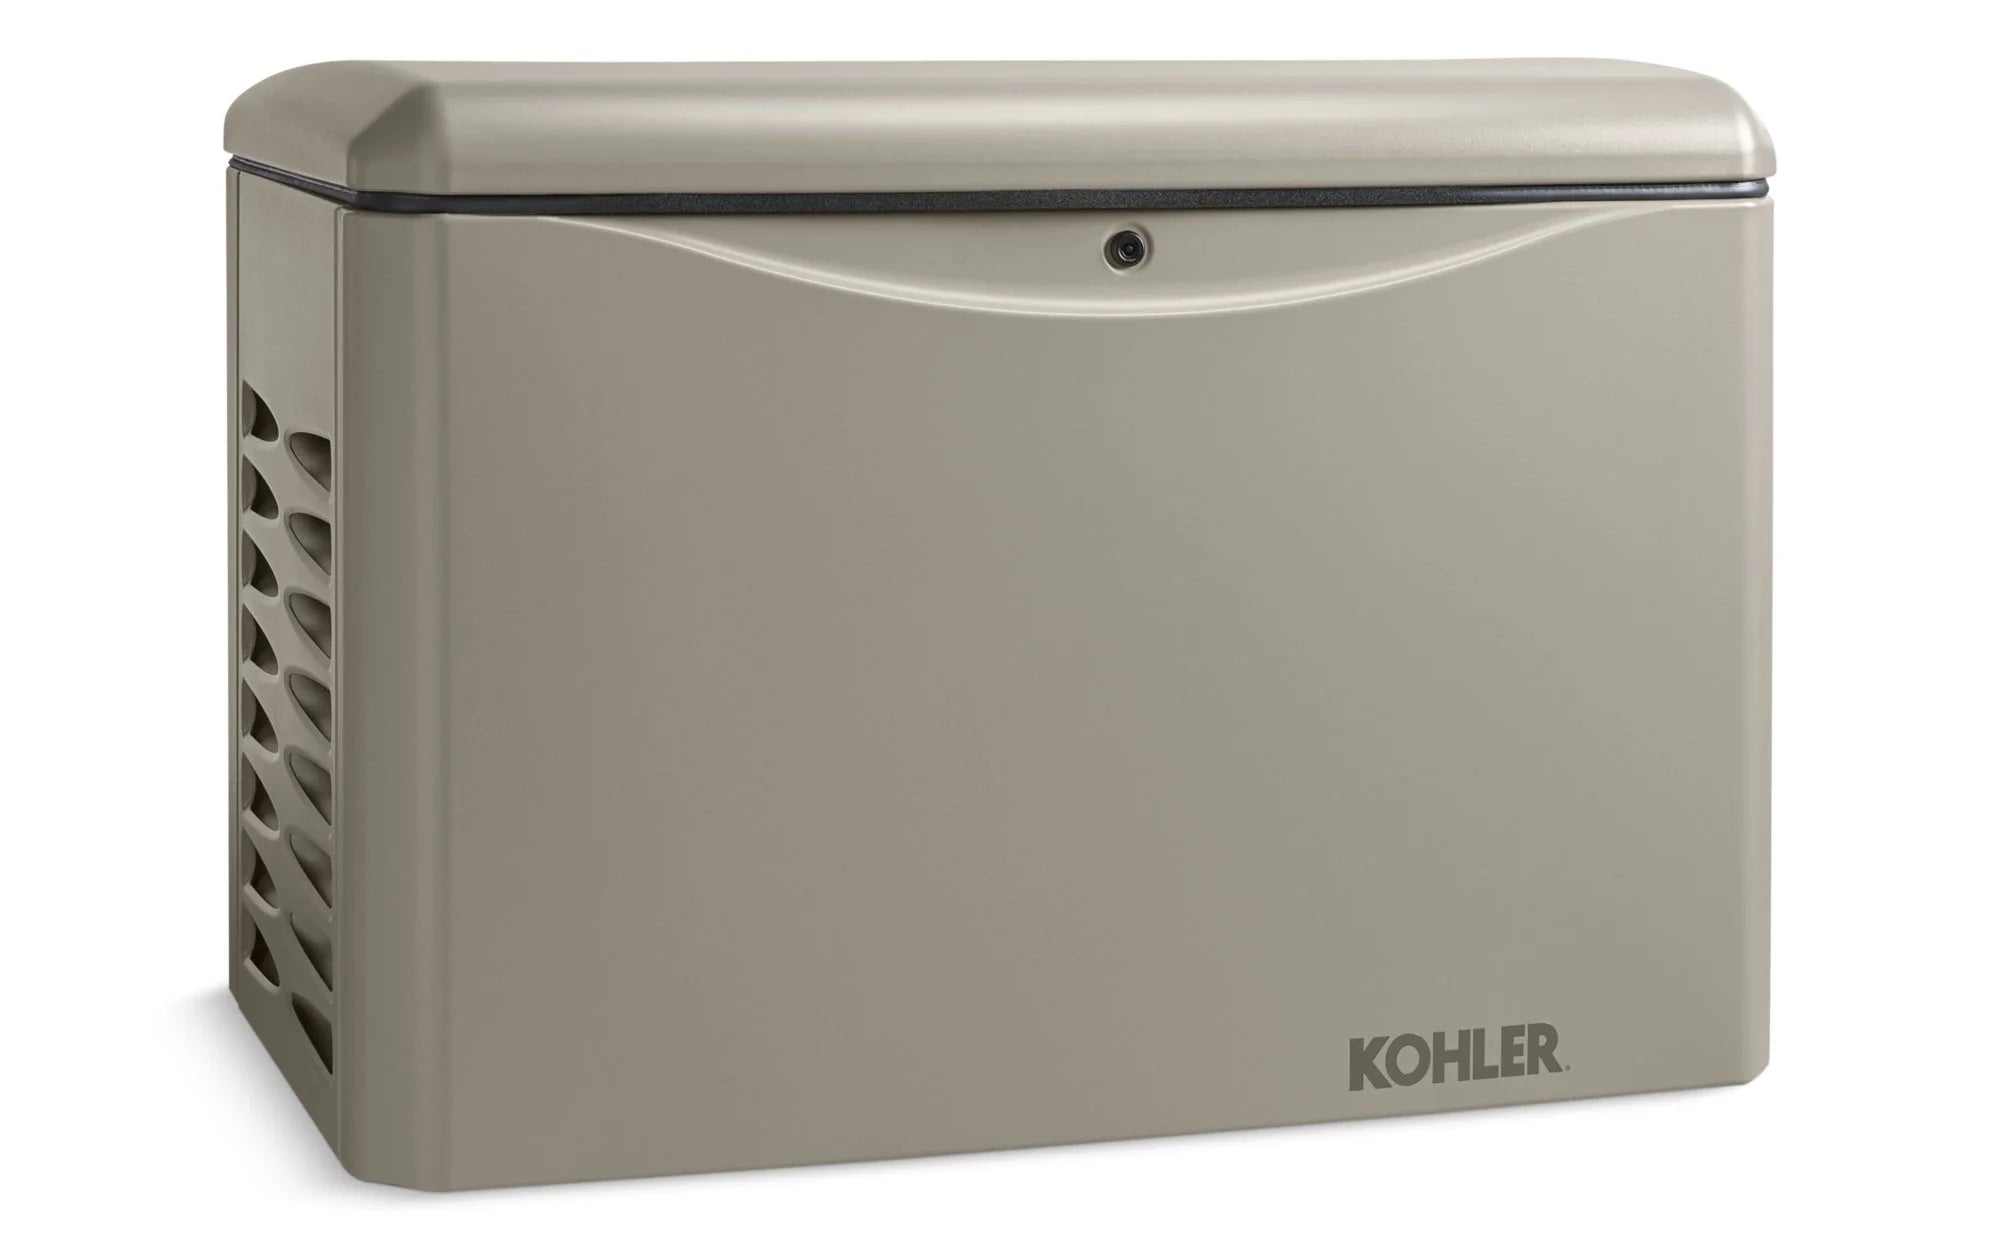 Kohler 14RCA-QS7 14KW 120/208 3-Phase Standby Generator with OnCue Plus New